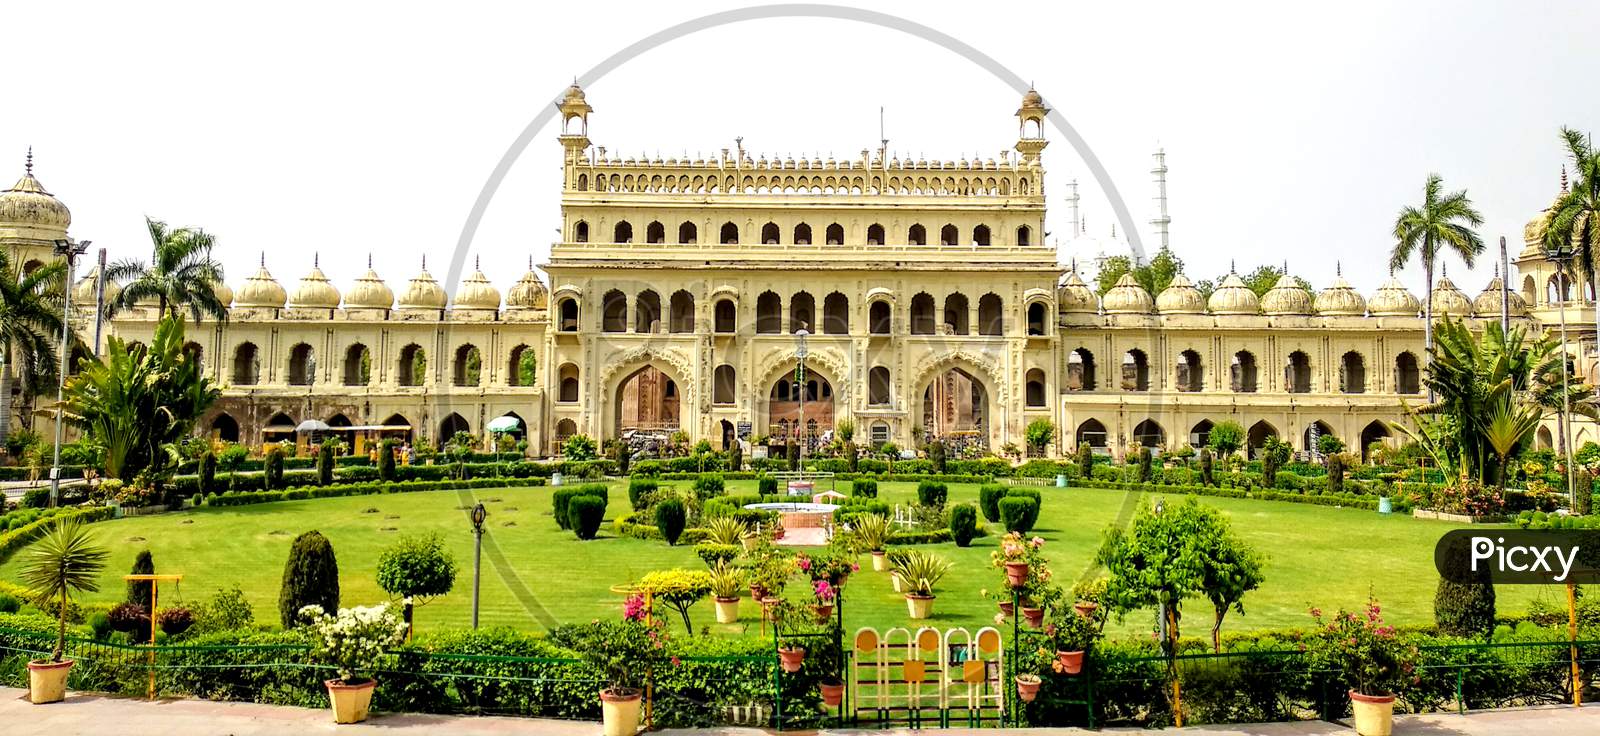 Lucknow Bara Imambara Or Asfi Mosque,Building Complex In Lucknow , India.